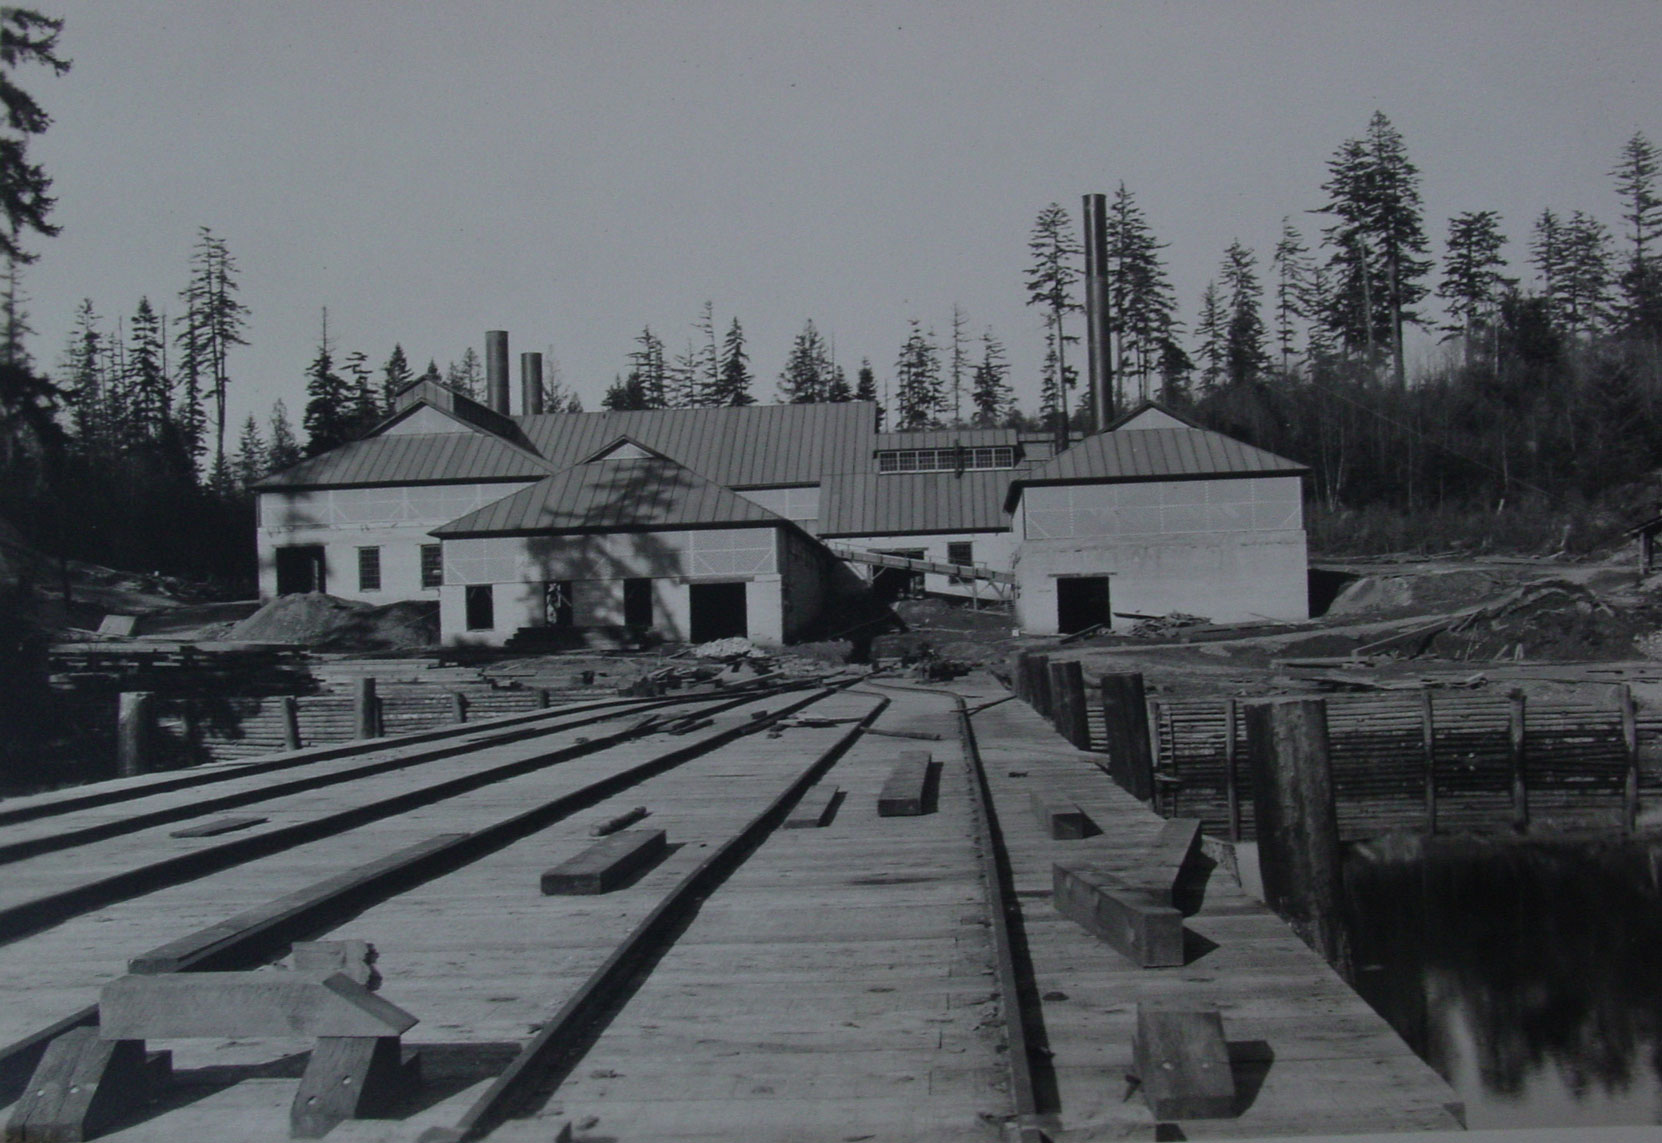 The Vancouver Portland Cement Company dock and plant at Tod Inlet, 1904. The plant appears to be still under construction in this photograph. (District of Saanich Archives)